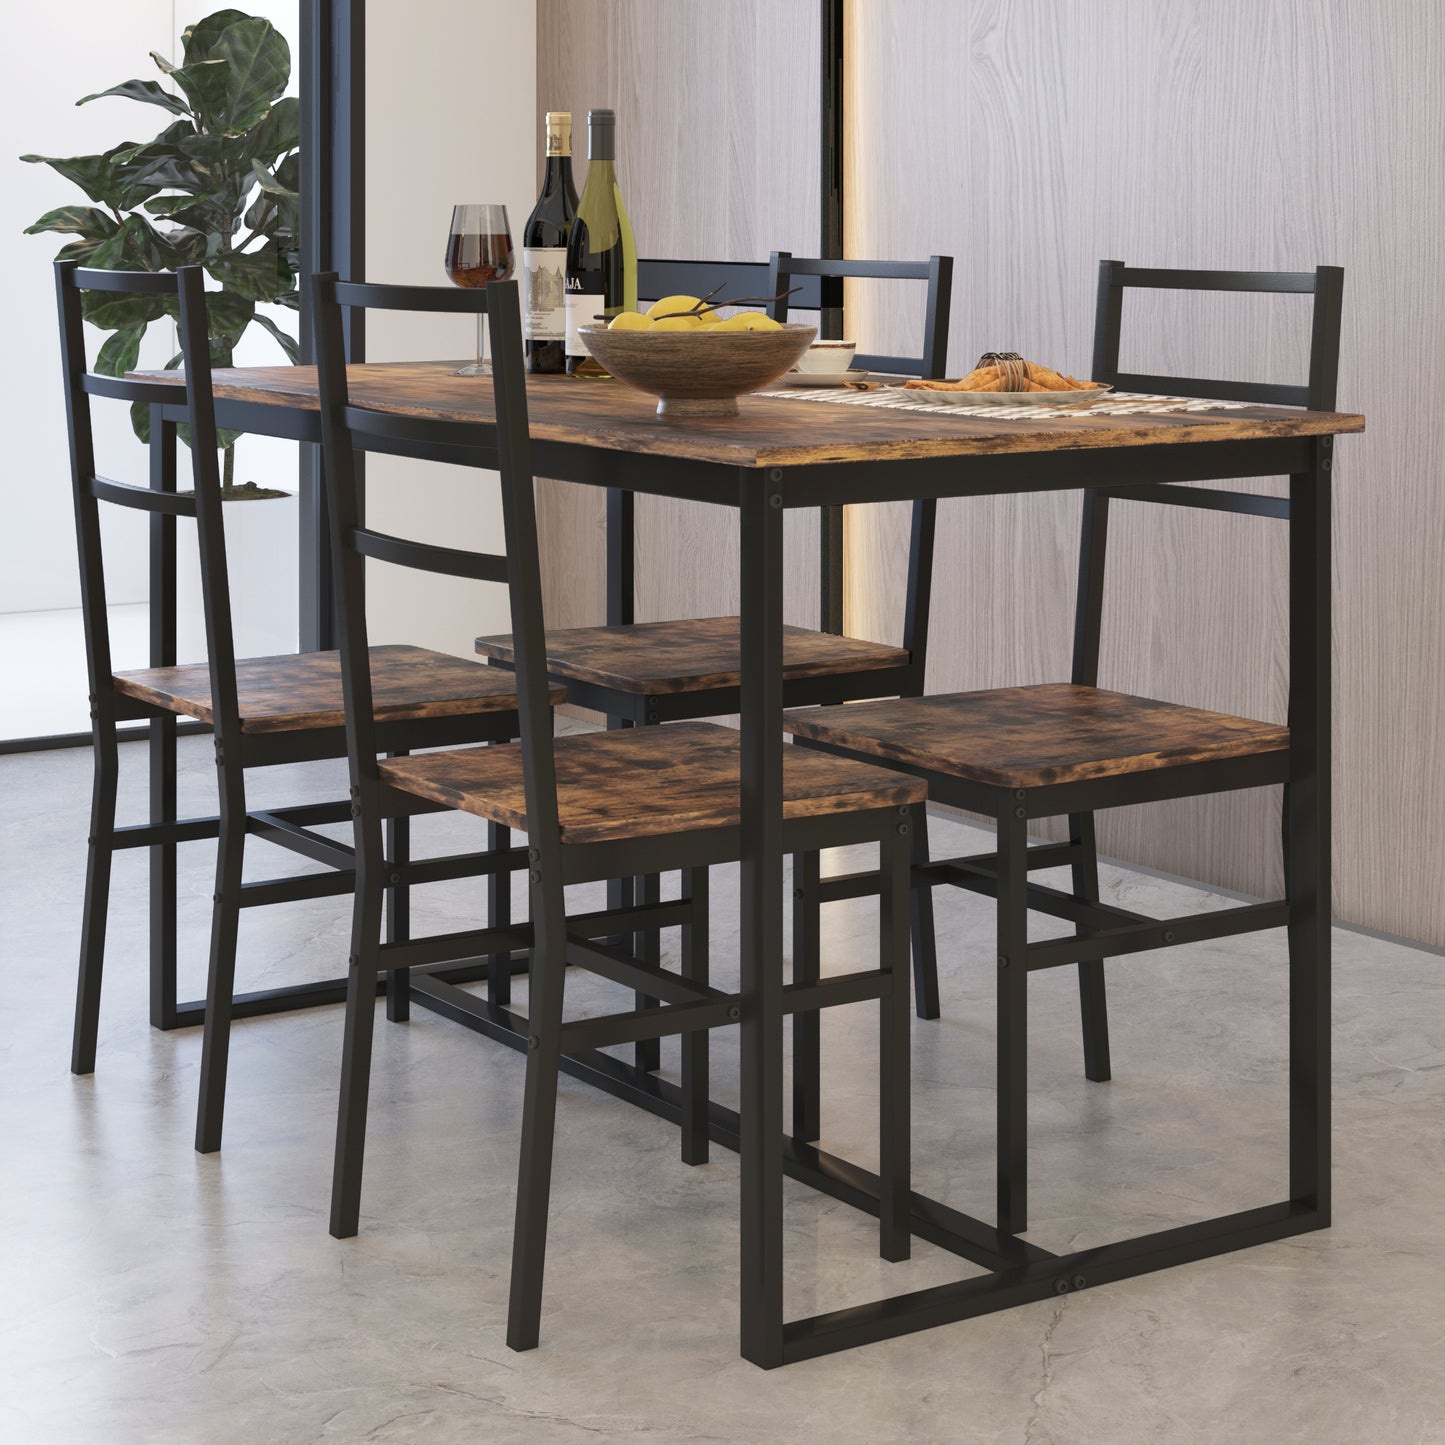 5 Piece Dining Table Set, Modern Rustic Table and Chairs Set for 4, Home Kitchen Breakfast Table Set, Dinette Table Set with 4 Chairs, Wooden Tabletop and Steel Frame, D6113